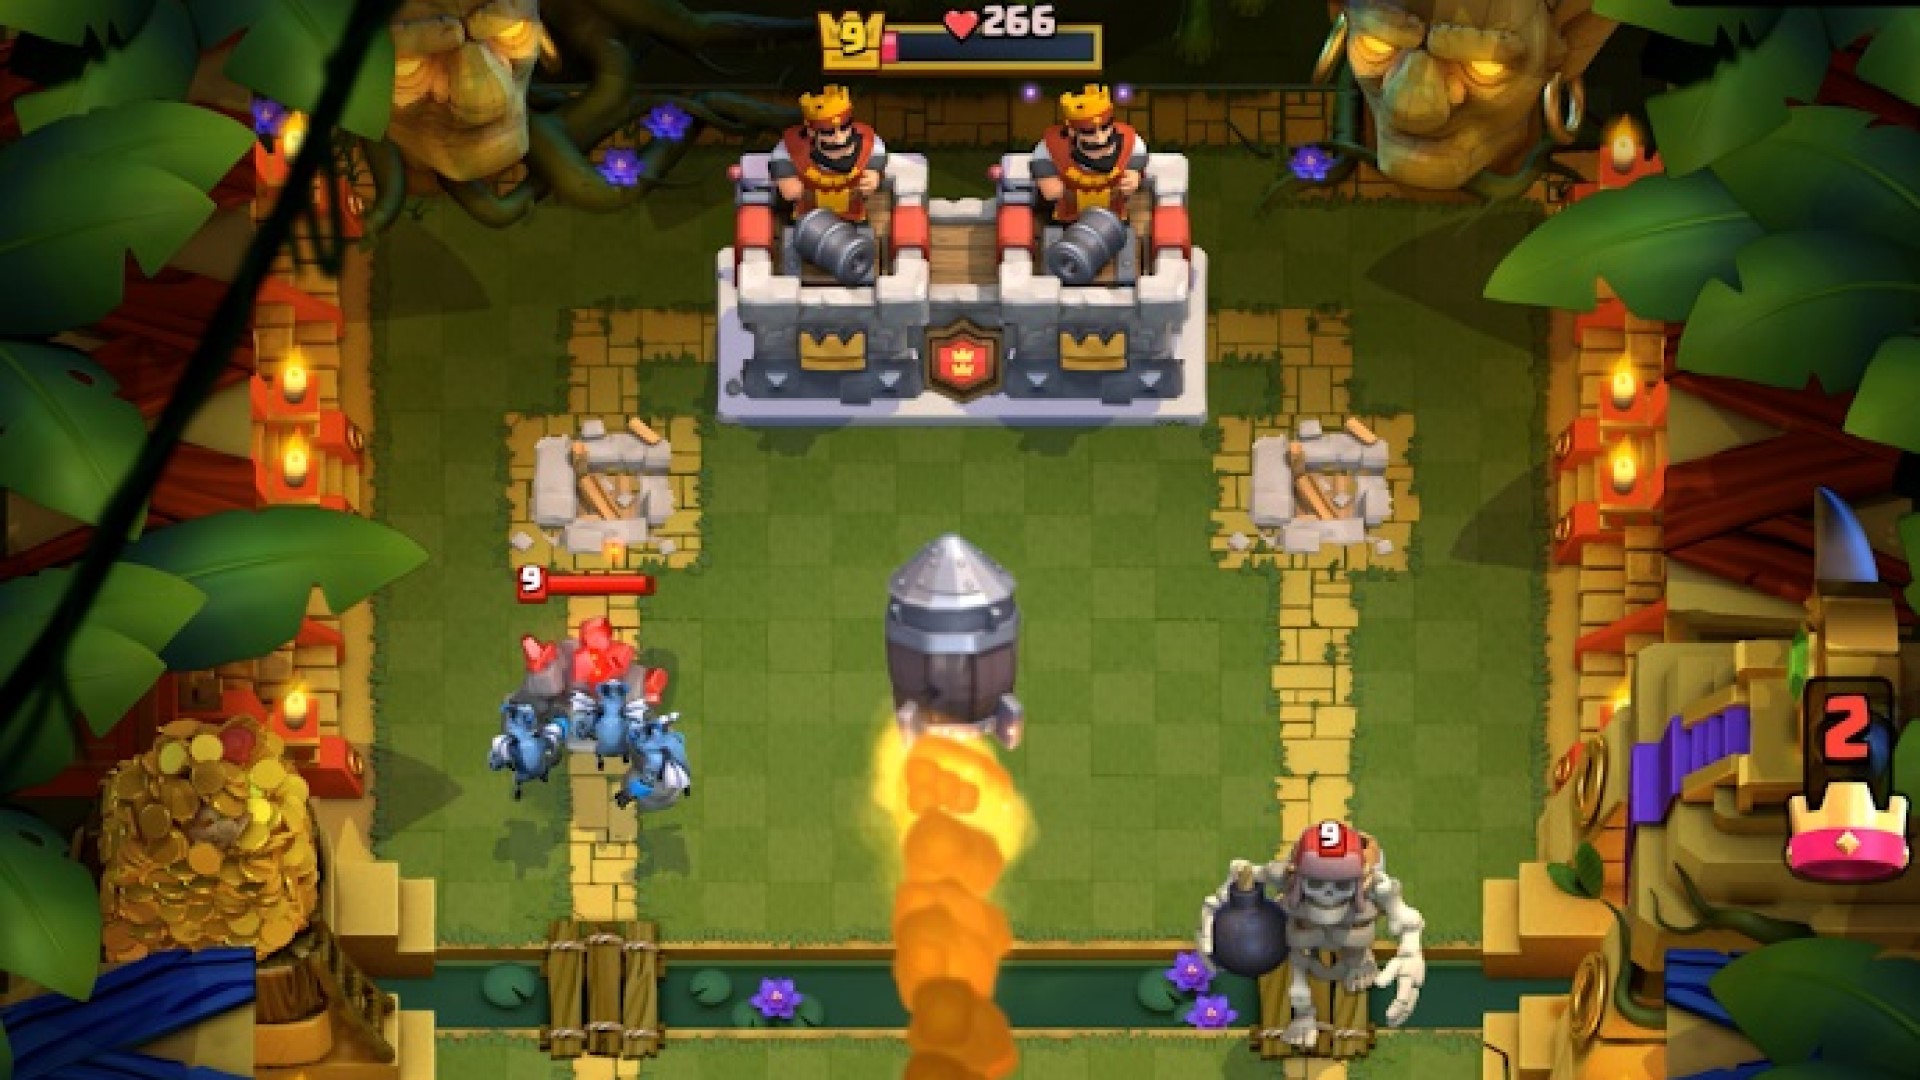 Best mobile strategy games: Clash Royale. Image shows two kings aiming cannons at a giant skeleton in a jungle-like setting.